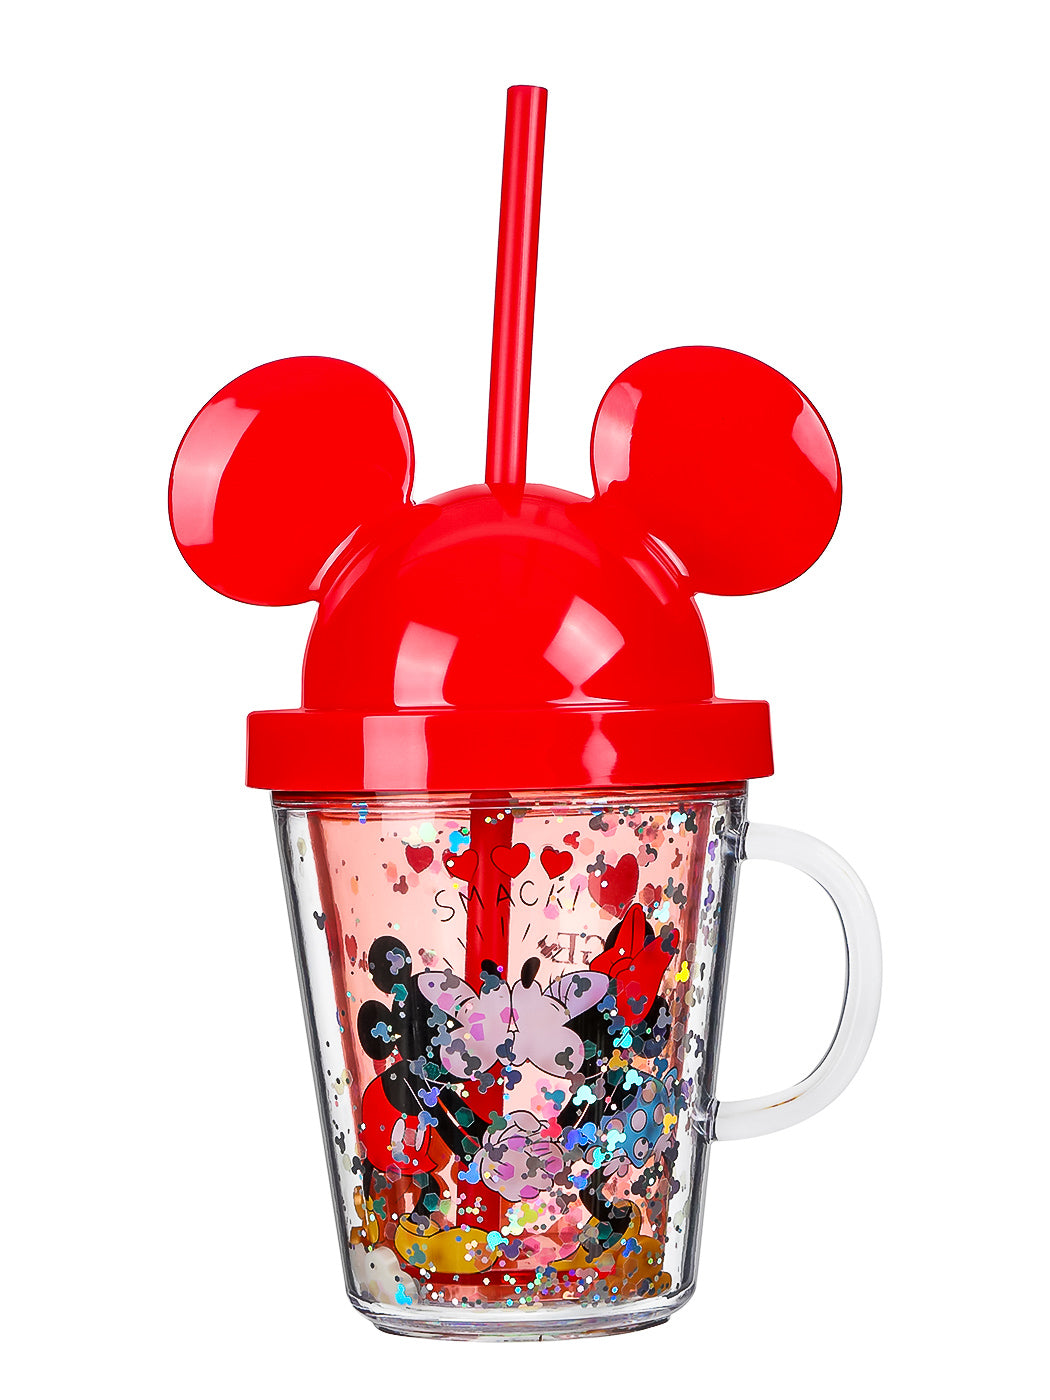 MINISO MICKEY MOUSE COLLECTION STRAW MUG WITH LID 280ML 2008484210104 PLASTIC WATER BOTTLE-10